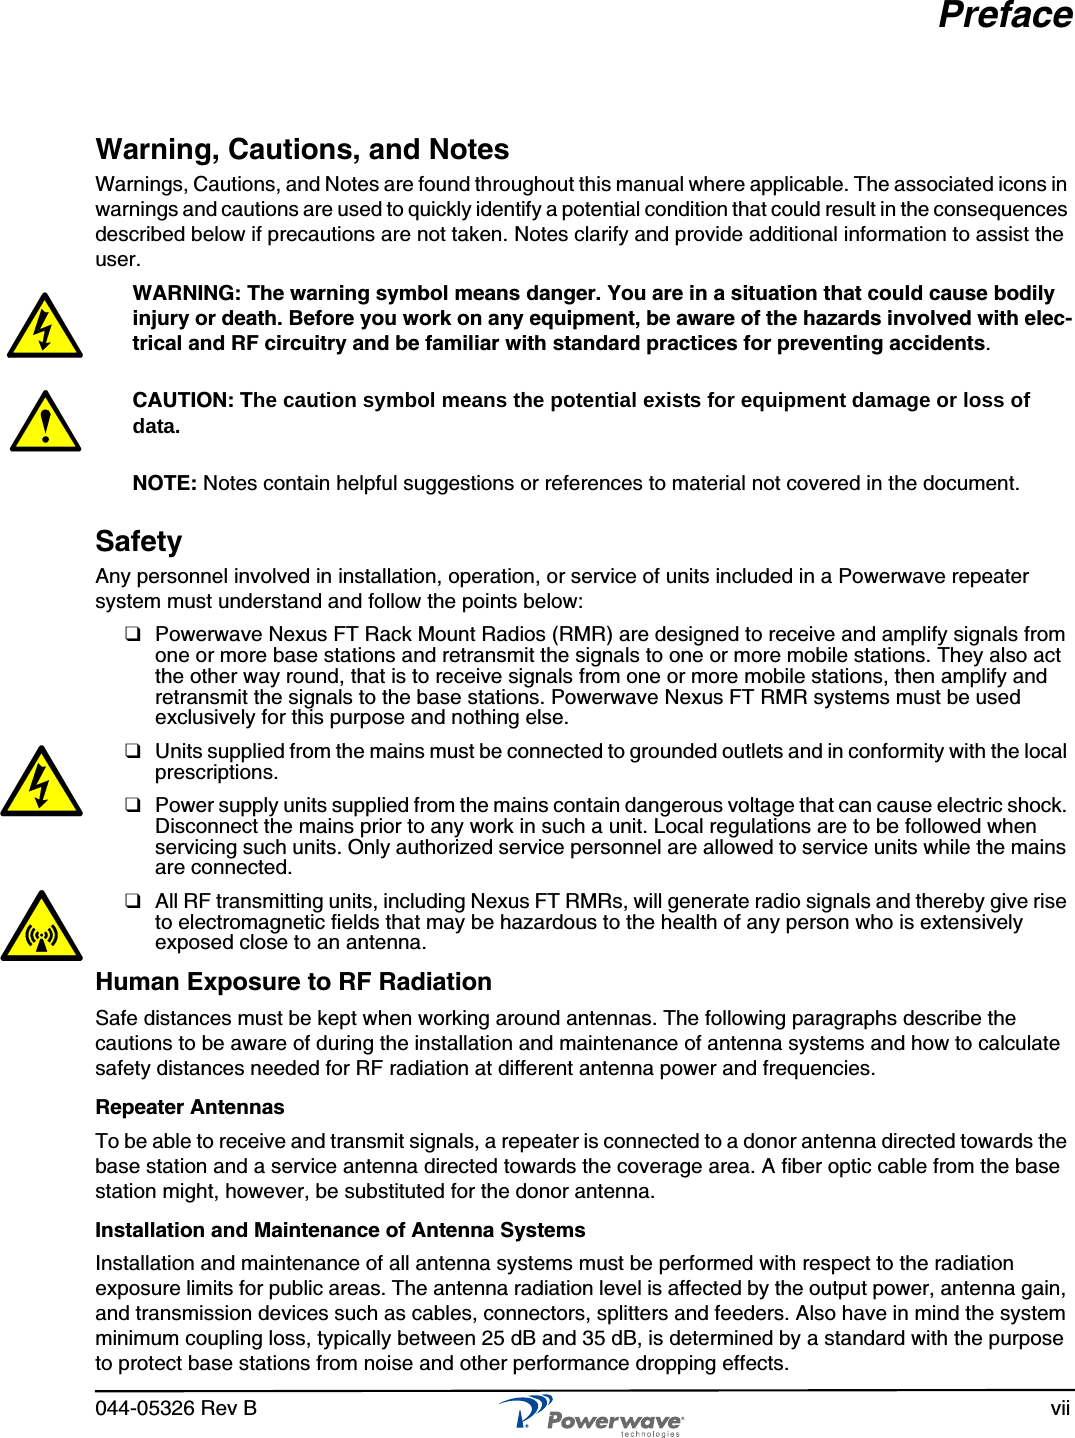 044-05326 Rev B viiPrefaceWarning, Cautions, and NotesWarnings, Cautions, and Notes are found throughout this manual where applicable. The associated icons in warnings and cautions are used to quickly identify a potential condition that could result in the consequences described below if precautions are not taken. Notes clarify and provide additional information to assist the user.WARNING: The warning symbol means danger. You are in a situation that could cause bodily injury or death. Before you work on any equipment, be aware of the hazards involved with elec-trical and RF circuitry and be familiar with standard practices for preventing accidents.CAUTION: The caution symbol means the potential exists for equipment damage or loss of data.NOTE: Notes contain helpful suggestions or references to material not covered in the document.SafetyAny personnel involved in installation, operation, or service of units included in a Powerwave repeater system must understand and follow the points below:❑Powerwave Nexus FT Rack Mount Radios (RMR) are designed to receive and amplify signals from one or more base stations and retransmit the signals to one or more mobile stations. They also act the other way round, that is to receive signals from one or more mobile stations, then amplify and retransmit the signals to the base stations. Powerwave Nexus FT RMR systems must be used exclusively for this purpose and nothing else.❑Units supplied from the mains must be connected to grounded outlets and in conformity with the local prescriptions.❑Power supply units supplied from the mains contain dangerous voltage that can cause electric shock. Disconnect the mains prior to any work in such a unit. Local regulations are to be followed when servicing such units. Only authorized service personnel are allowed to service units while the mains are connected.❑All RF transmitting units, including Nexus FT RMRs, will generate radio signals and thereby give rise to electromagnetic fields that may be hazardous to the health of any person who is extensively exposed close to an antenna.Human Exposure to RF RadiationSafe distances must be kept when working around antennas. The following paragraphs describe the cautions to be aware of during the installation and maintenance of antenna systems and how to calculate safety distances needed for RF radiation at different antenna power and frequencies.Repeater AntennasTo be able to receive and transmit signals, a repeater is connected to a donor antenna directed towards the base station and a service antenna directed towards the coverage area. A fiber optic cable from the base station might, however, be substituted for the donor antenna.Installation and Maintenance of Antenna SystemsInstallation and maintenance of all antenna systems must be performed with respect to the radiation exposure limits for public areas. The antenna radiation level is affected by the output power, antenna gain, and transmission devices such as cables, connectors, splitters and feeders. Also have in mind the system minimum coupling loss, typically between 25 dB and 35 dB, is determined by a standard with the purpose to protect base stations from noise and other performance dropping effects.